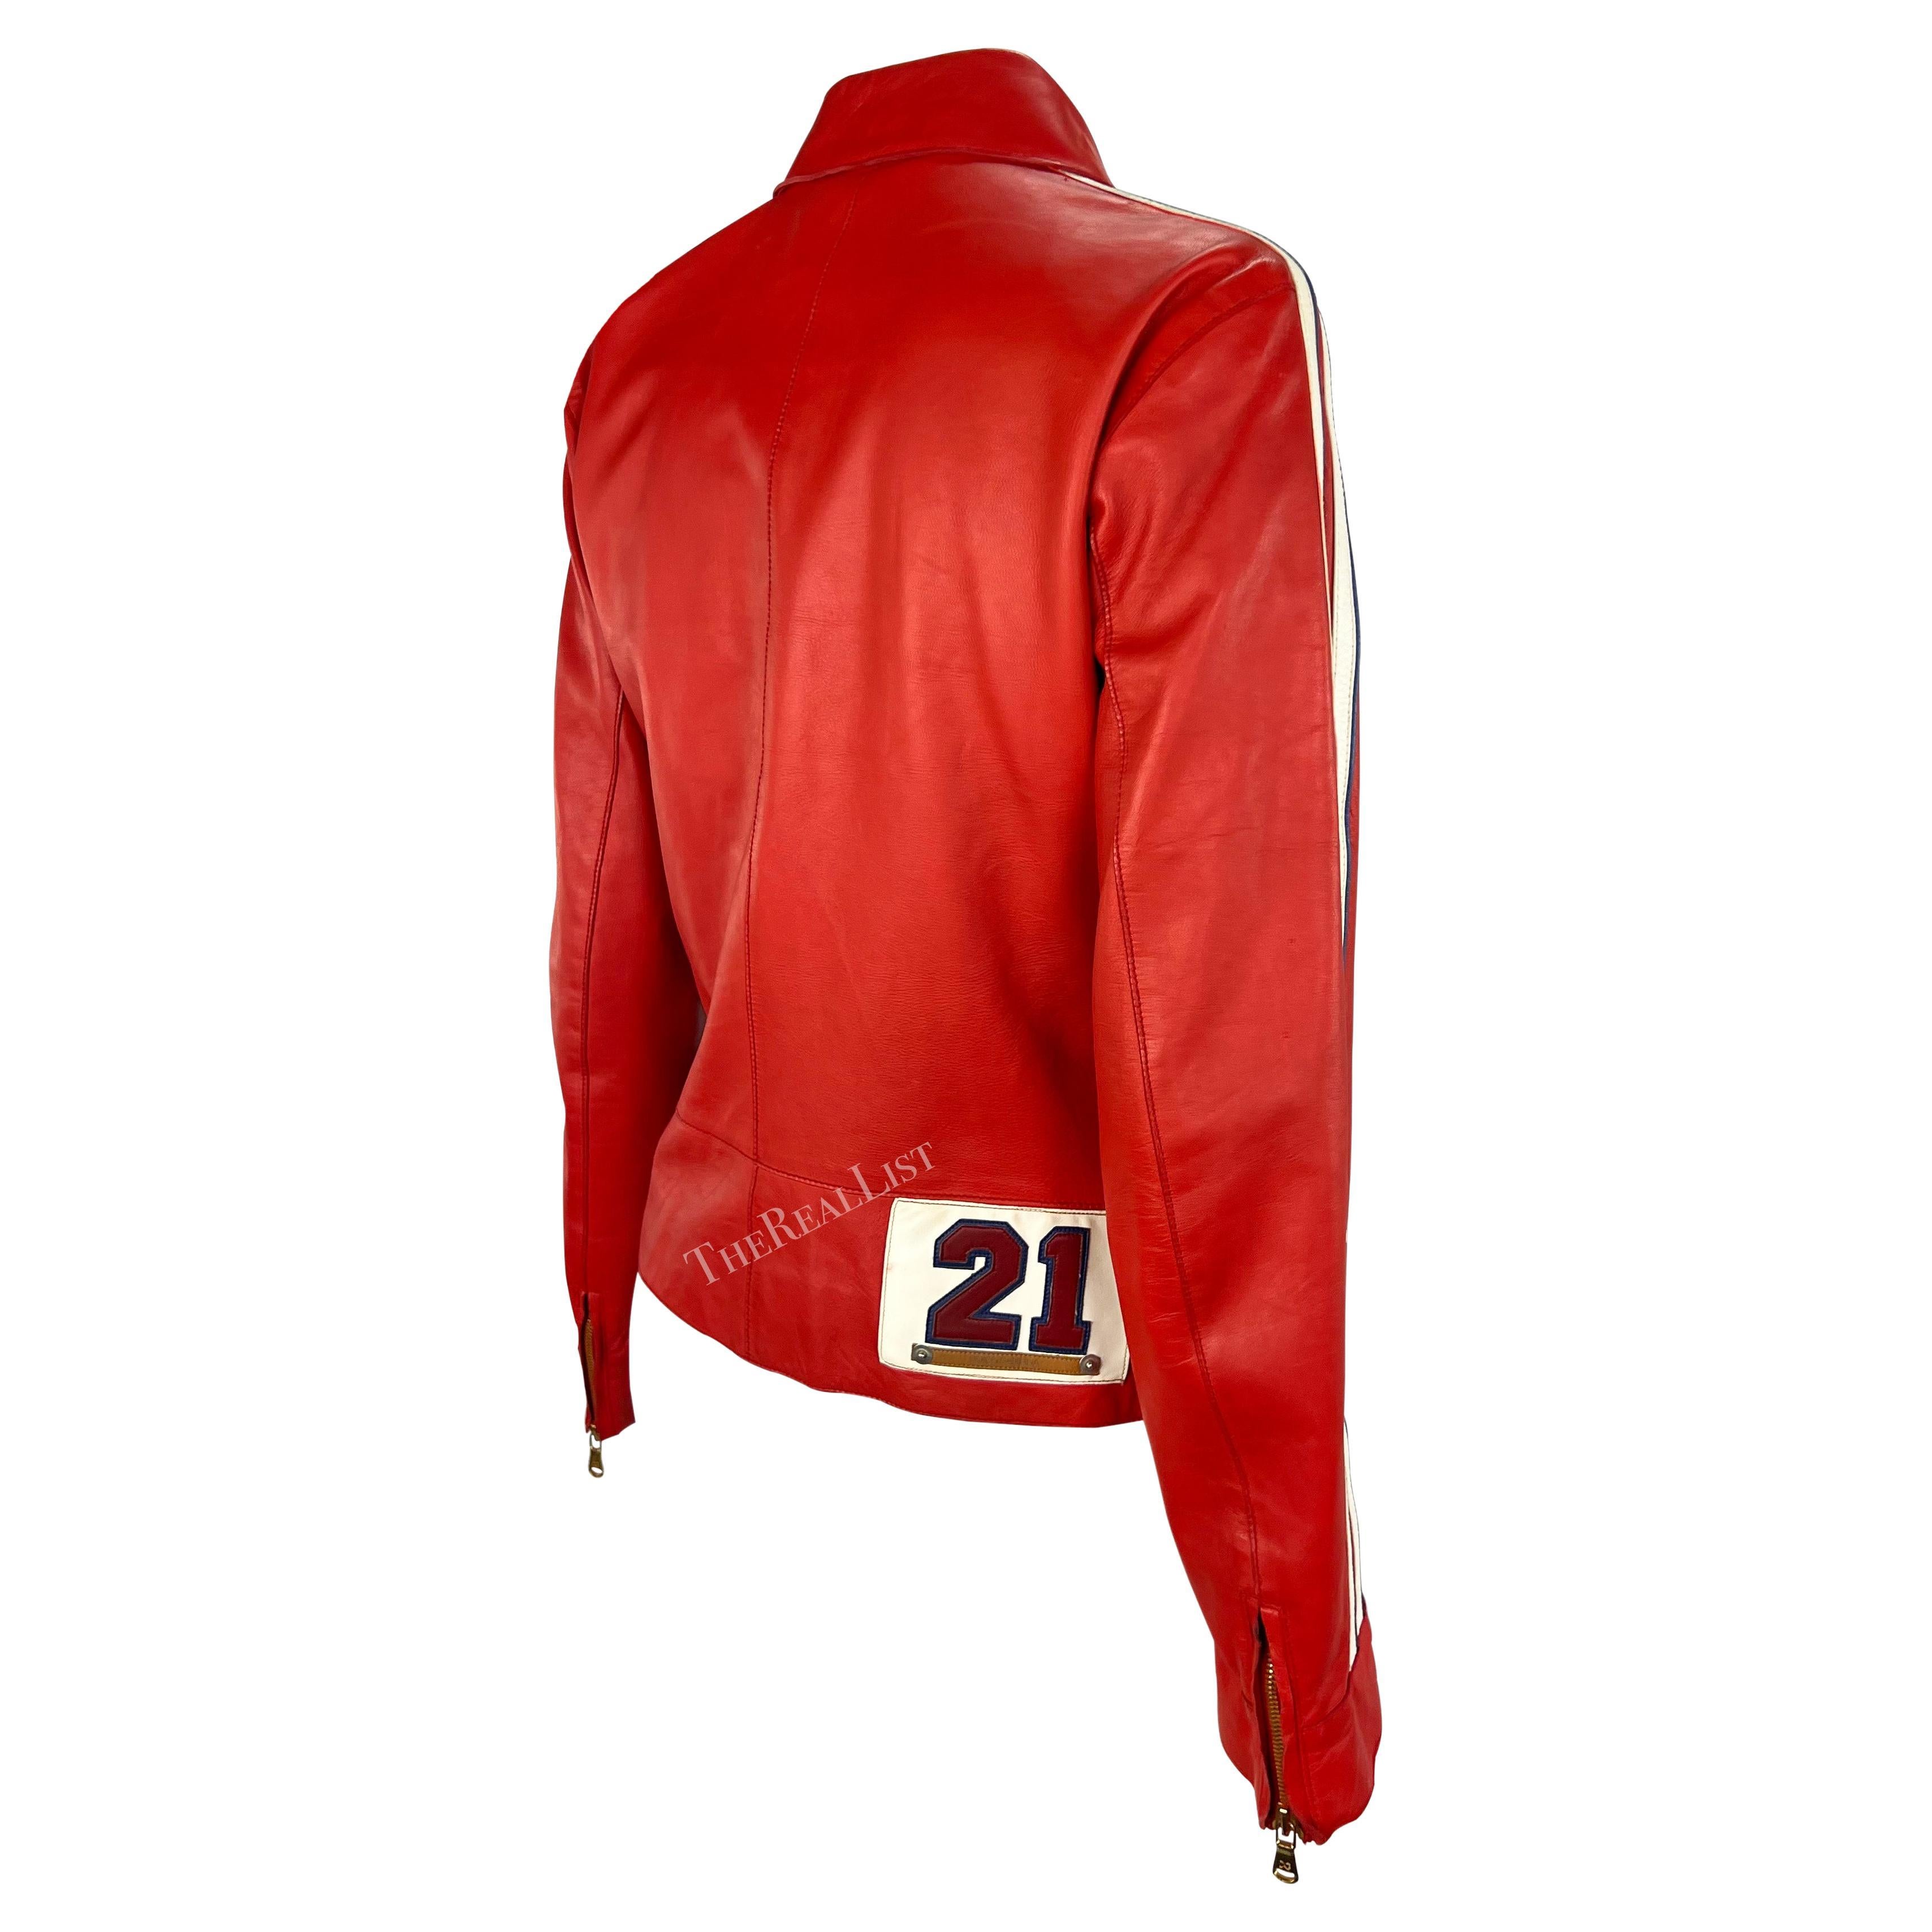 S/S 2001 Dolce & Gabbana Red Moto Style Leather Jacket For Sale